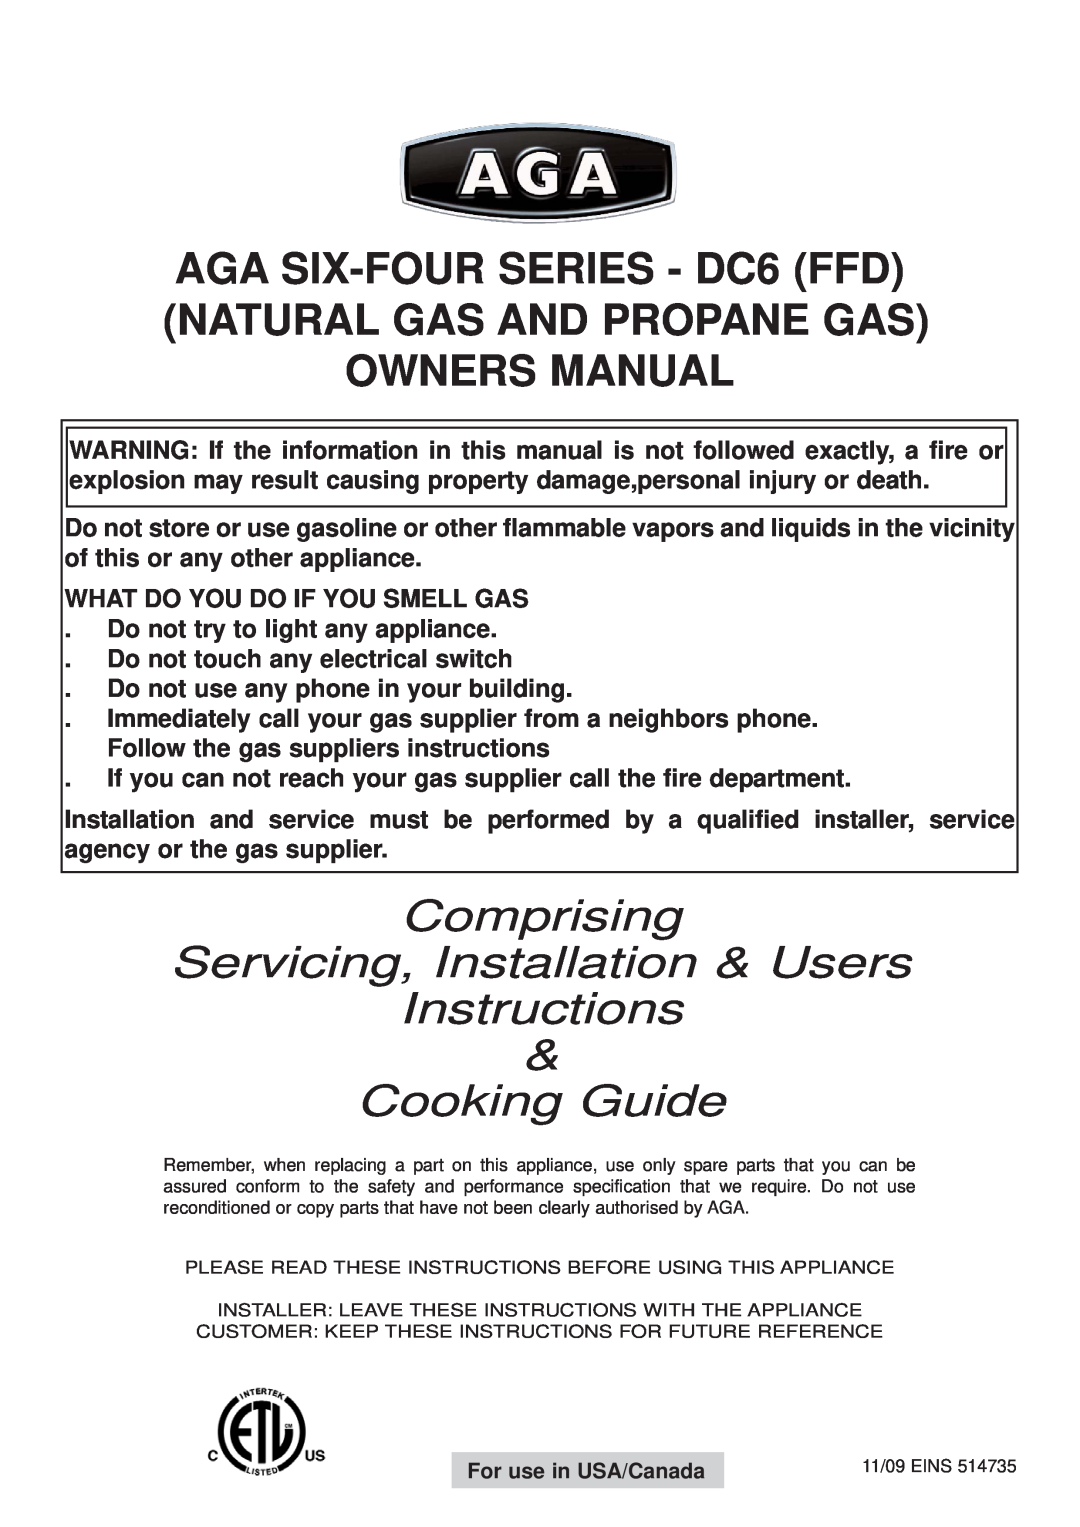 Aga Ranges DC6 (FFD) owner manual AGA SIX-FOUR SERIES - DC6 FFD NATURAL GAS AND PROPANE GAS, Owners Manual, Cooking Guide 